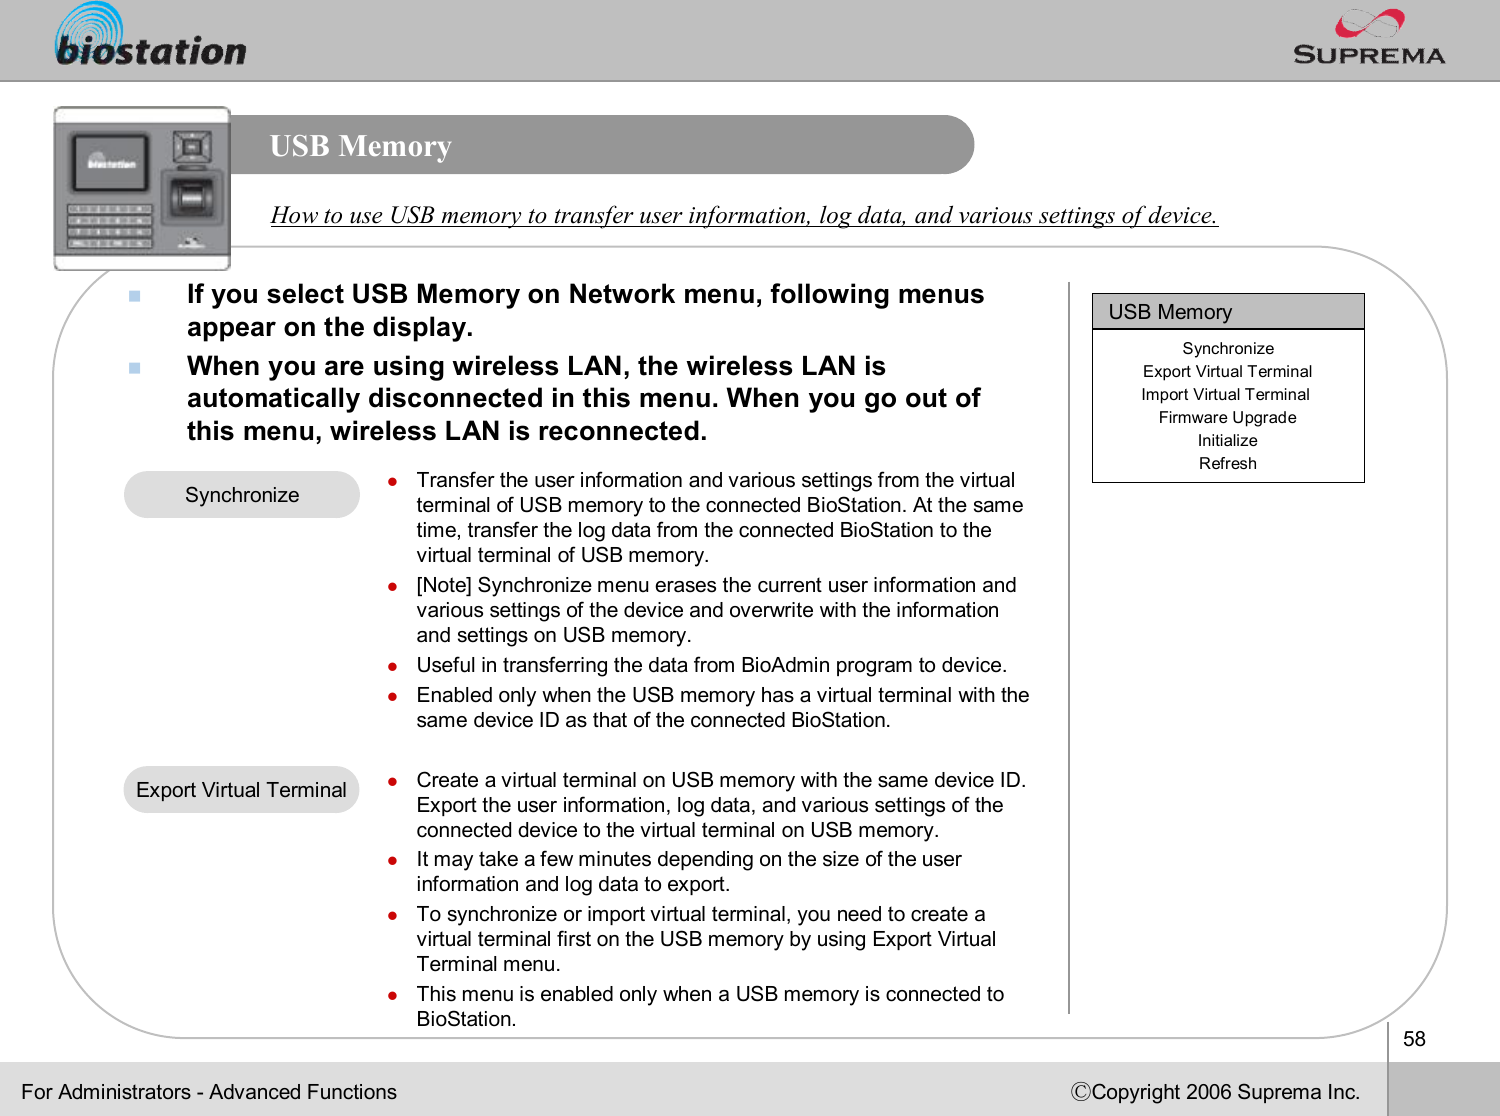 58ⒸCopyright 2006 Suprema Inc.USB MemorynIf you select USB Memory on Network menu, following menus appear on the display. nWhen you are using wireless LAN, the wireless LAN is automatically disconnected in this menu. When you go out of this menu, wireless LAN is reconnected.How to use USB memory to transfer user information, log data, and various settings of device. For Administrators -Advanced FunctionslTransfer the user information and various settings from the virtual terminal of USB memory to the connected BioStation. At the same time, transfer the log data from the connected BioStation to thevirtual terminal of USB memory. l[Note] Synchronize menu erases the current user information and various settings of the device and overwrite with the information and settings on USB memory.  lUseful in transferring the data from BioAdmin program to device.lEnabled only when the USB memory has a virtual terminal with thesame device ID as that of the connected BioStation. lCreate a virtual terminal on USB memory with the same device ID.Export the user information, log data, and various settings of the connected device to the virtual terminal on USB memory. lIt may take a few minutes depending on the size of the user information and log data to export. lTo synchronize or import virtual terminal, you need to create a virtual terminal first on the USB memory by using Export VirtualTerminal menu. lThis menu is enabled only when a USB memory is connected to BioStation.SynchronizeExport Virtual TerminalUSB MemorySynchronizeExport Virtual TerminalImport Virtual Terminal Firmware UpgradeInitializeRefresh